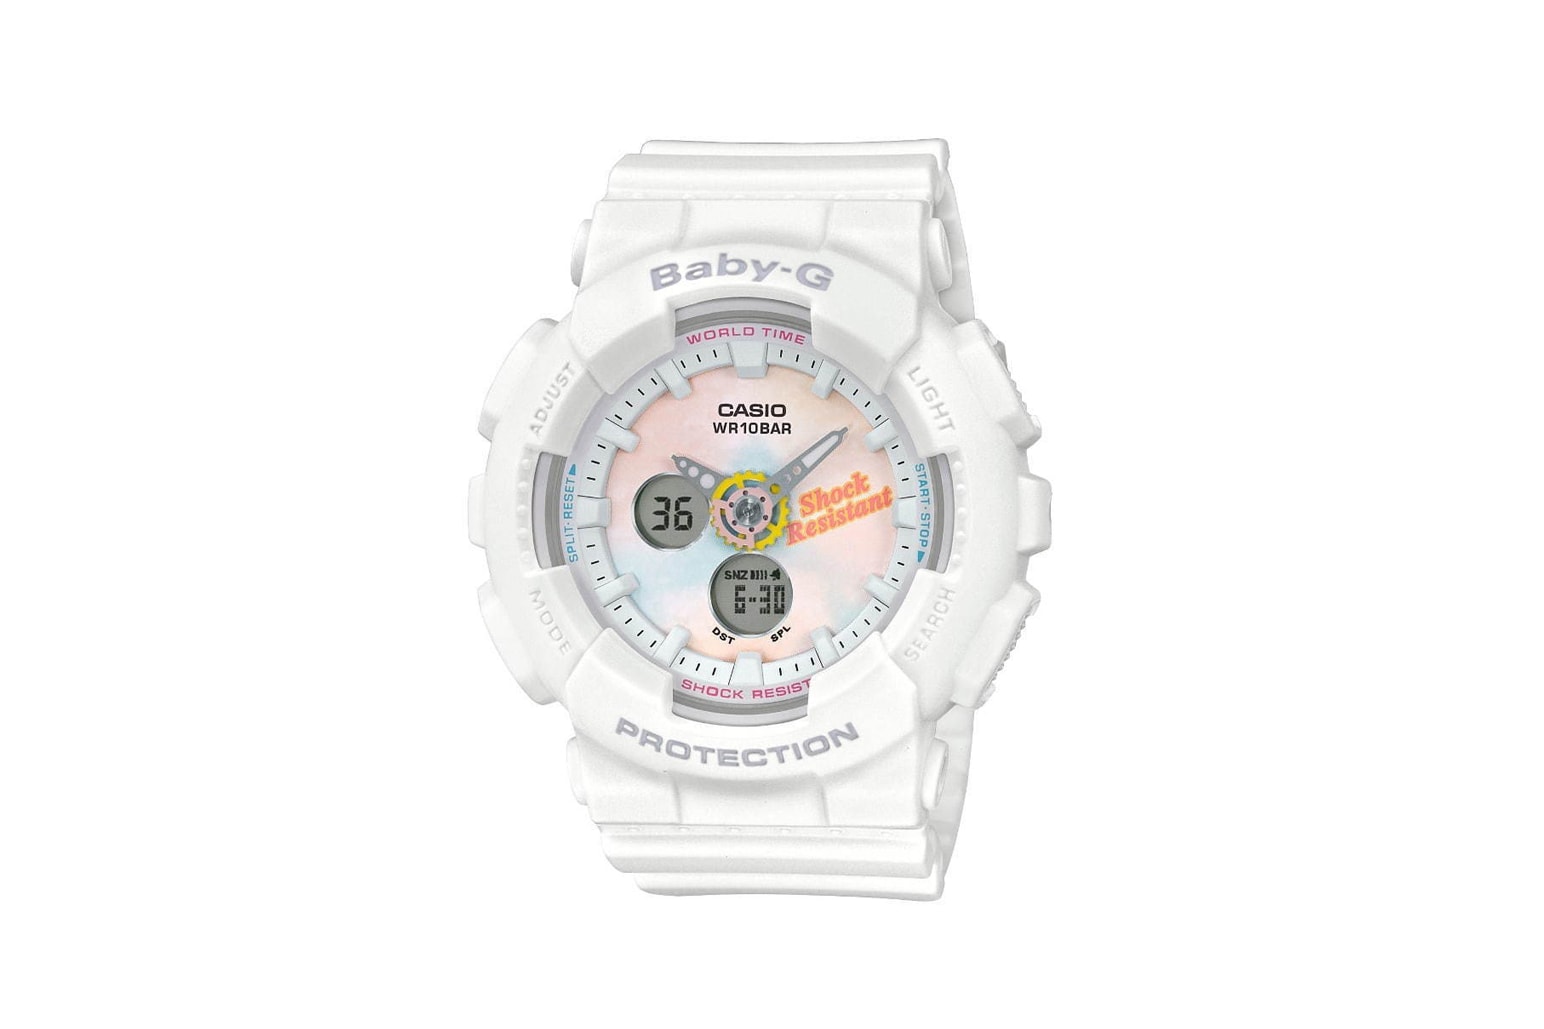 Baby-G Summer Gradation Dial Watch Collection White Yellow Pink Tie Dye